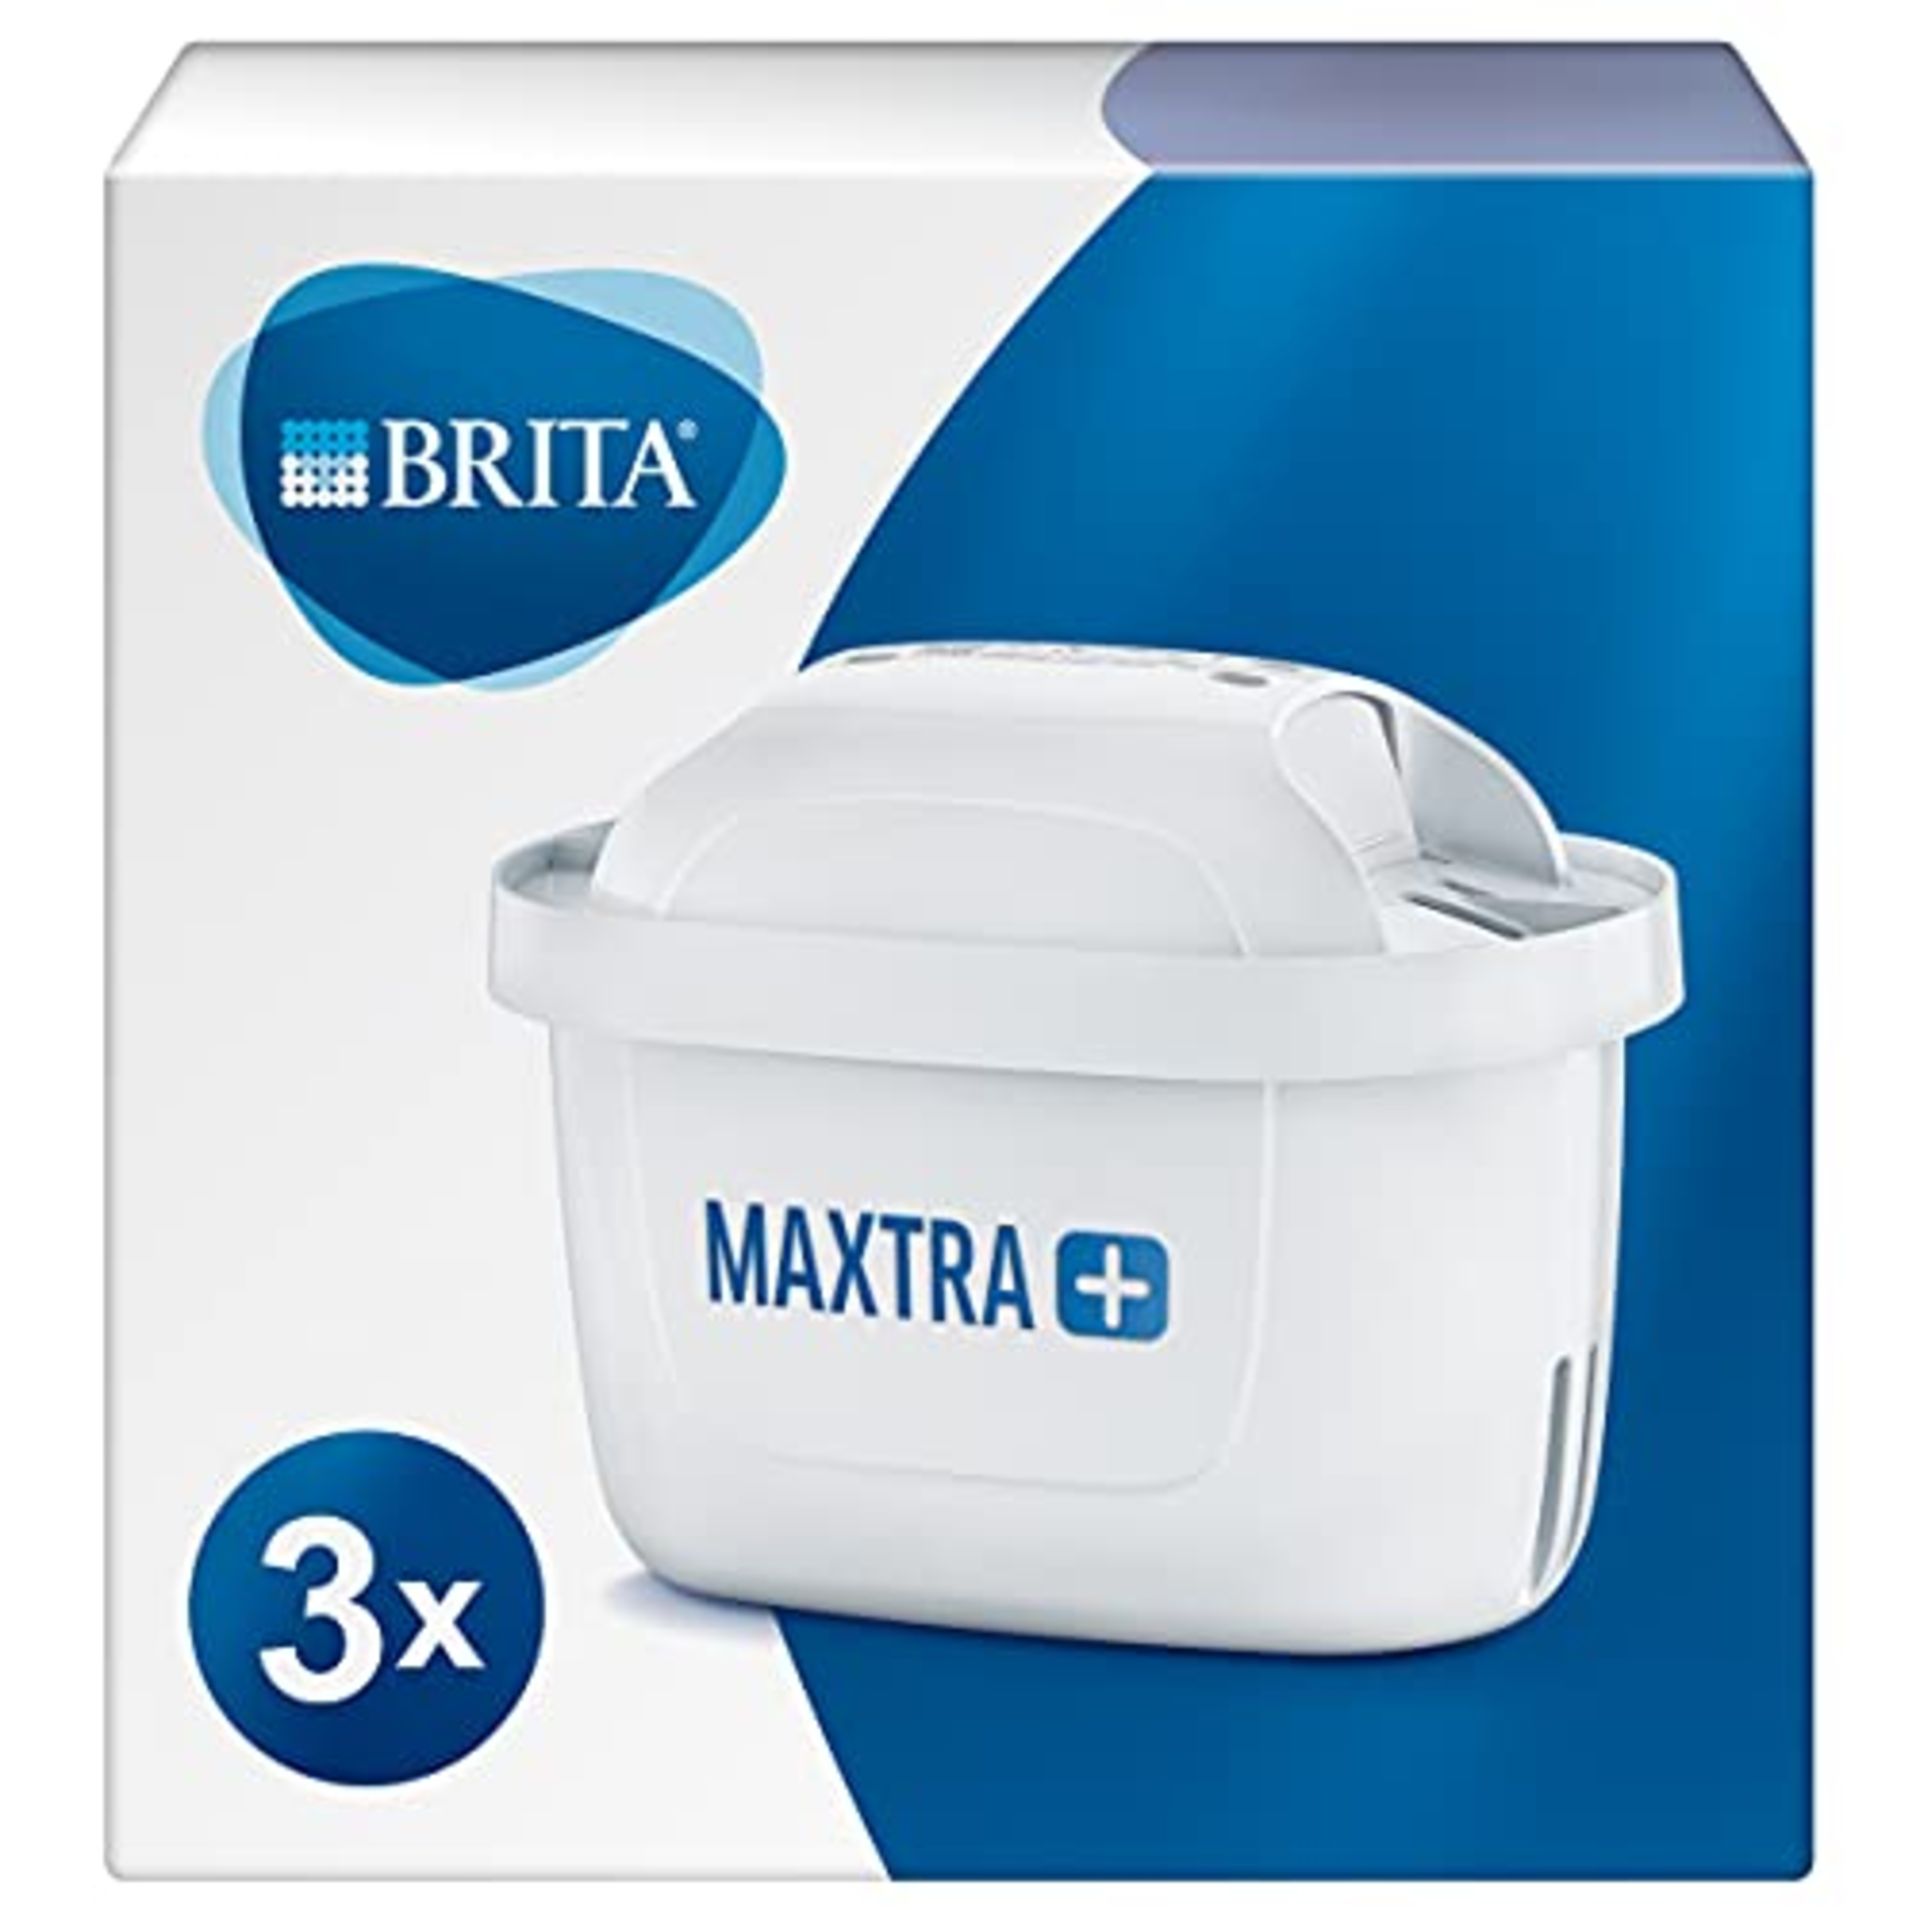 BRITA MAXTRA + Replacement Water Filter Cartridges , Compatible with all BRITA Jugs - Reduce Chlorin